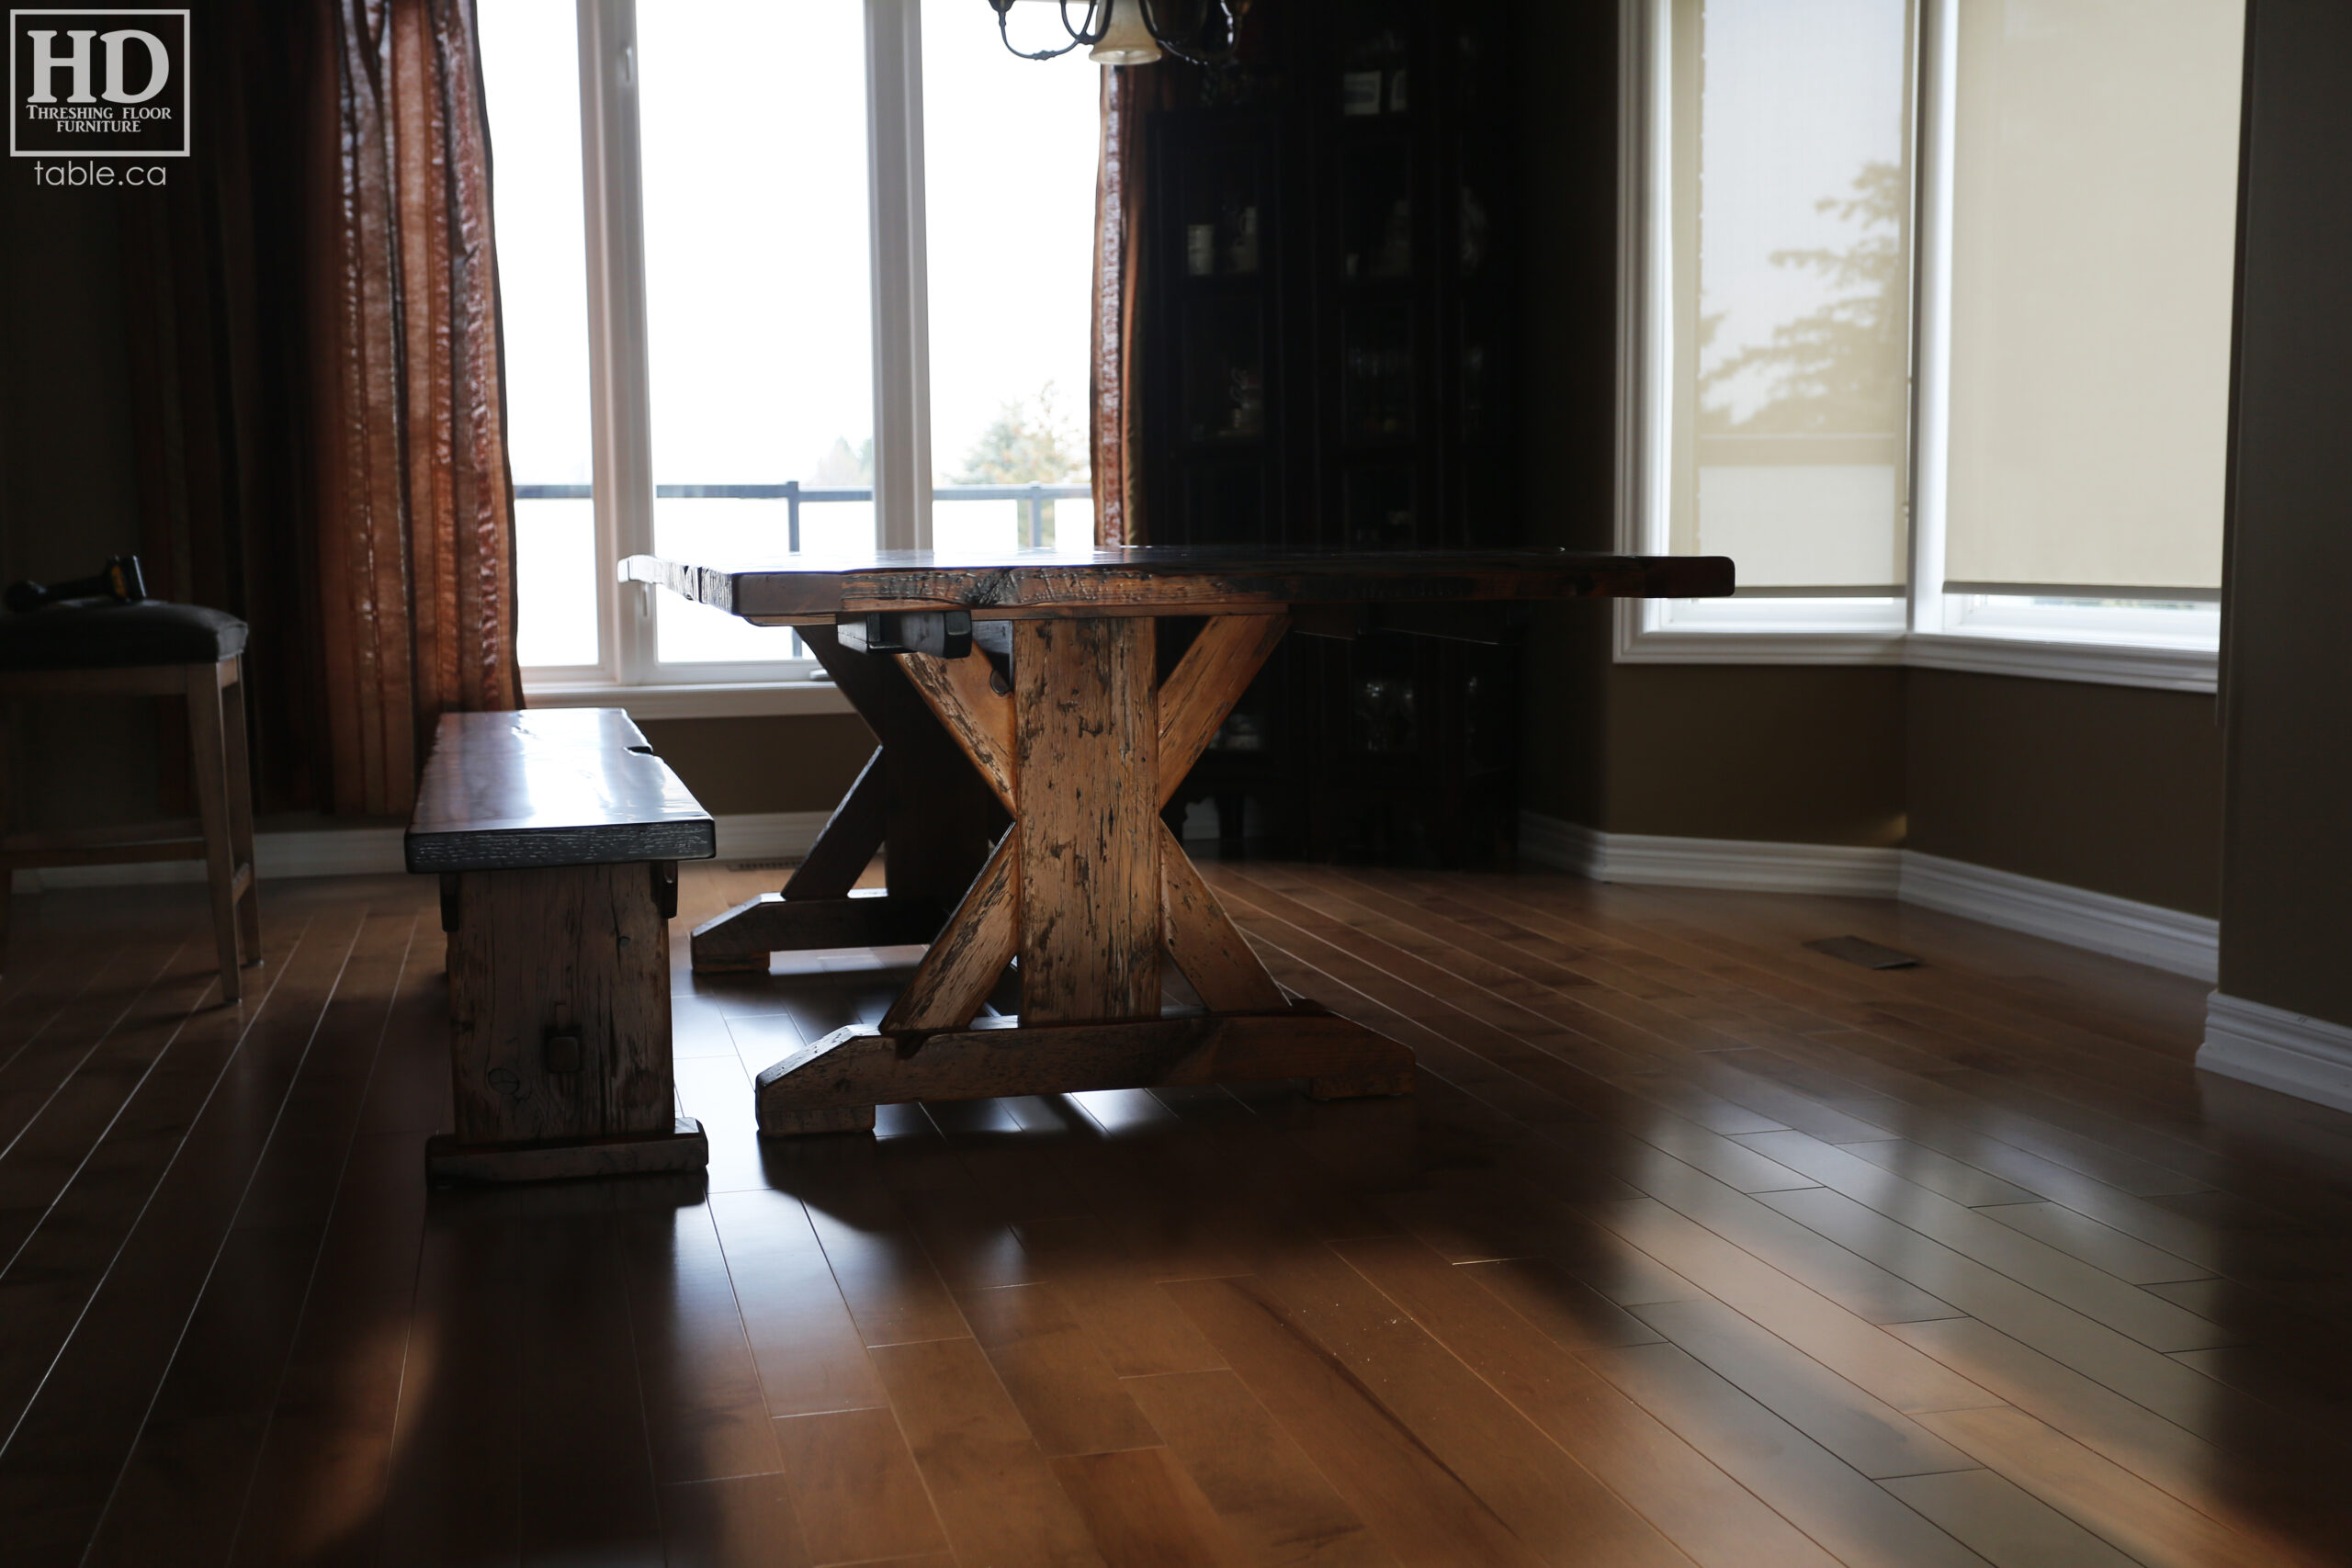 Reclaimed Wood Table with Sawbuck Style Base by HD Threshing Floor Furniture / www.table.ca